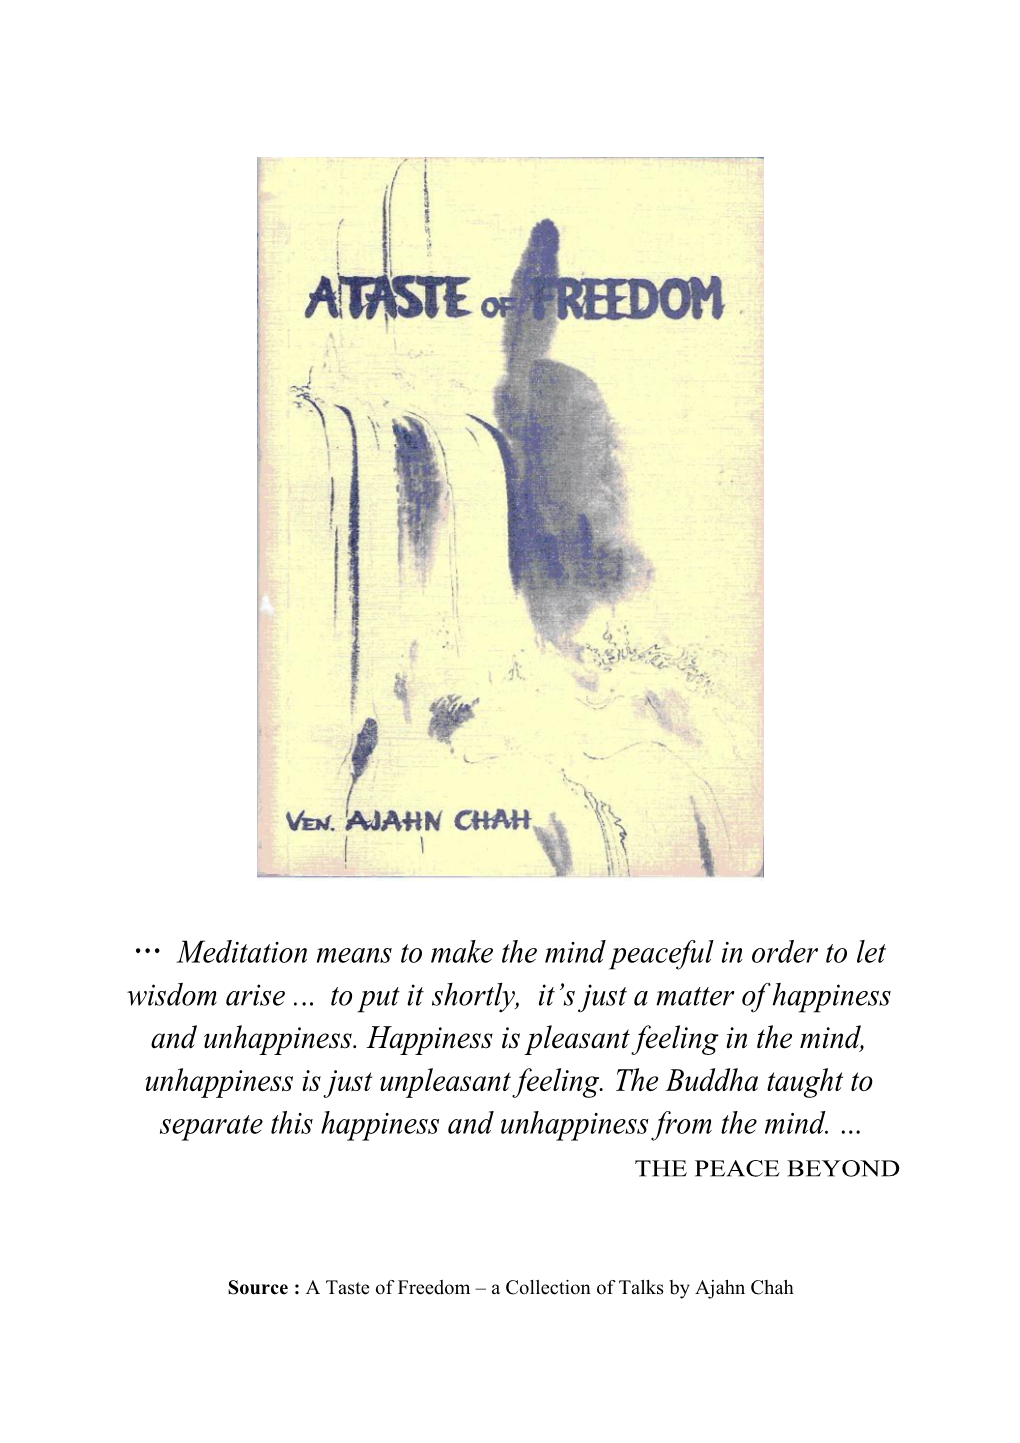 Source : a Taste of Freedom a Collection of Talks by Ajahn Chah